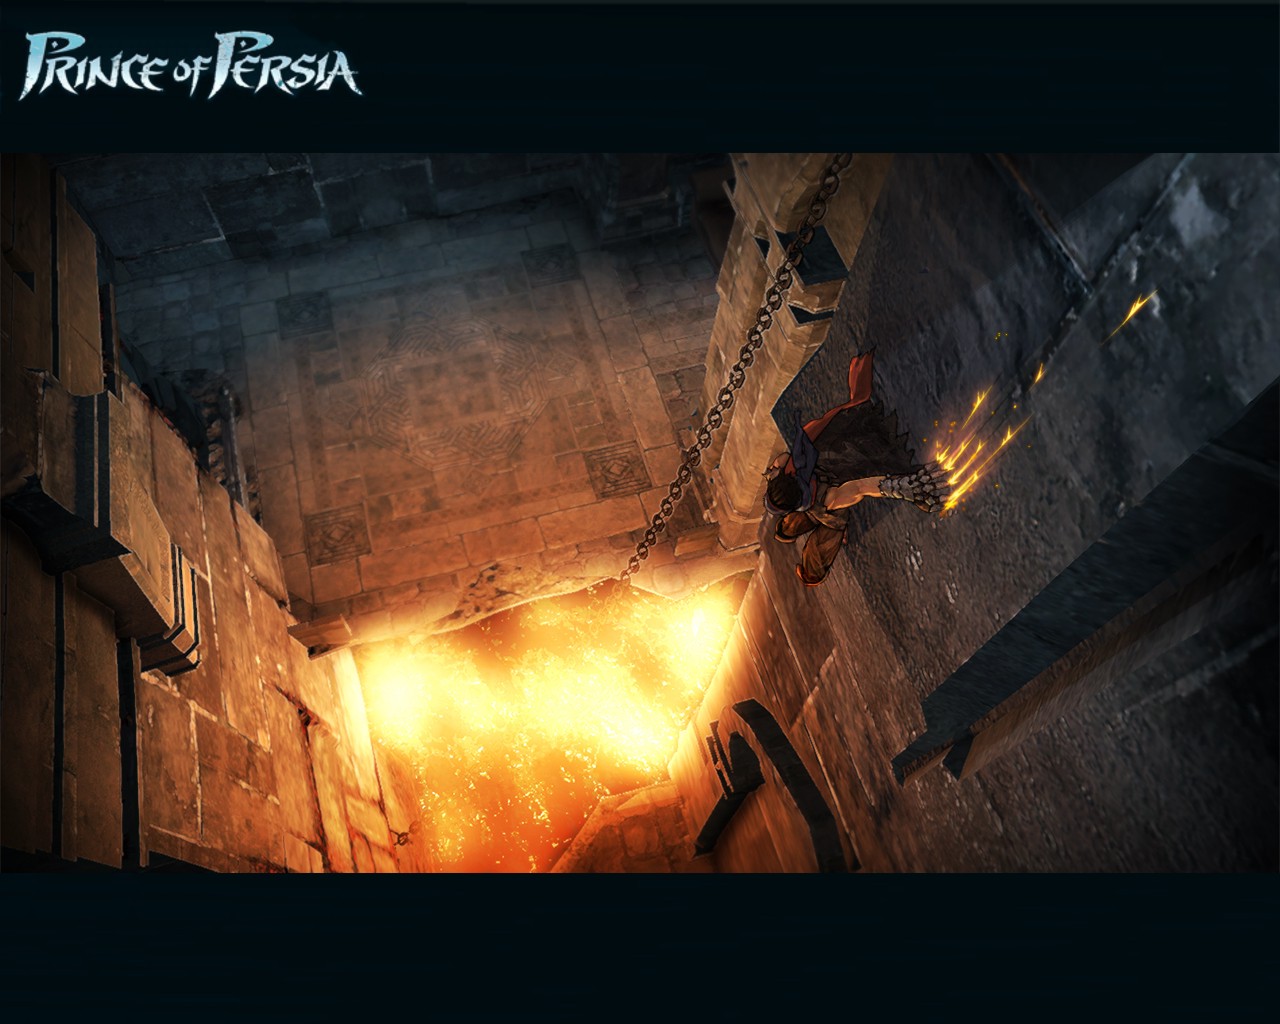 Download High quality Prince of Persia wallpaper / Games / 1280x1024